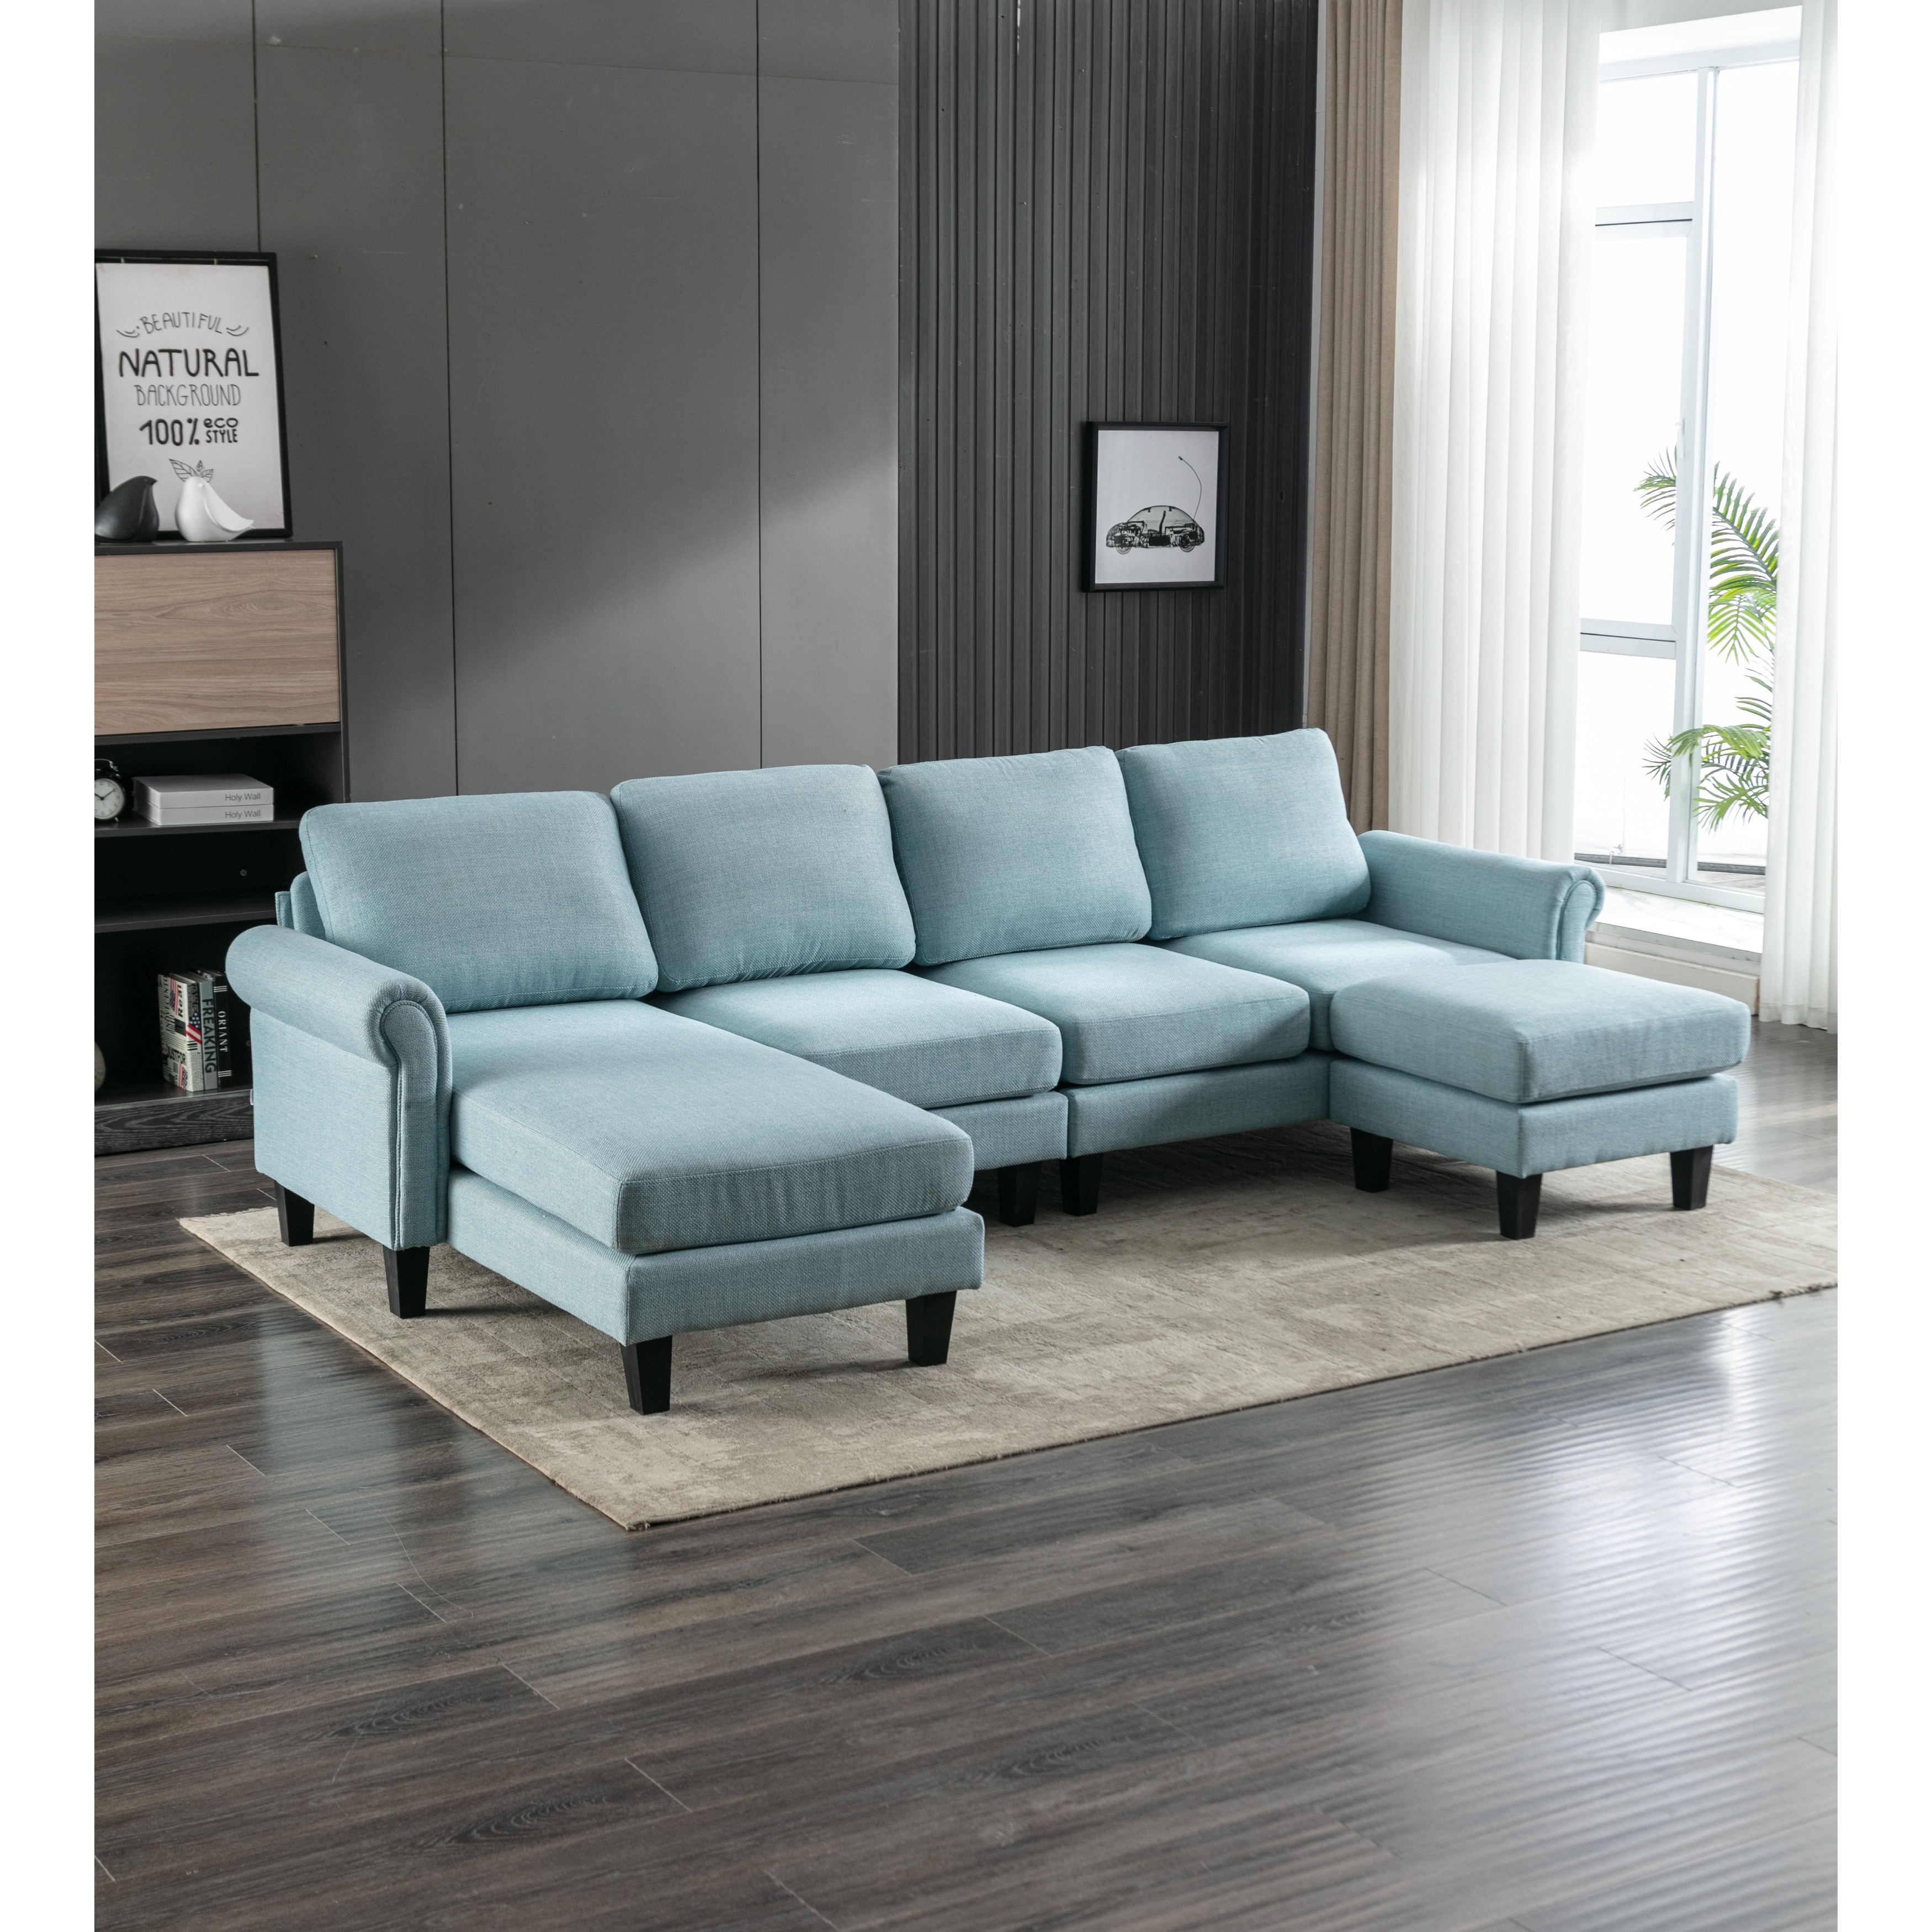 Modern Accent Living Room Sofa With Ottoman For Home Bedroom  L-shape Convertible Sectional Sofa With Soft Seat and Armrest